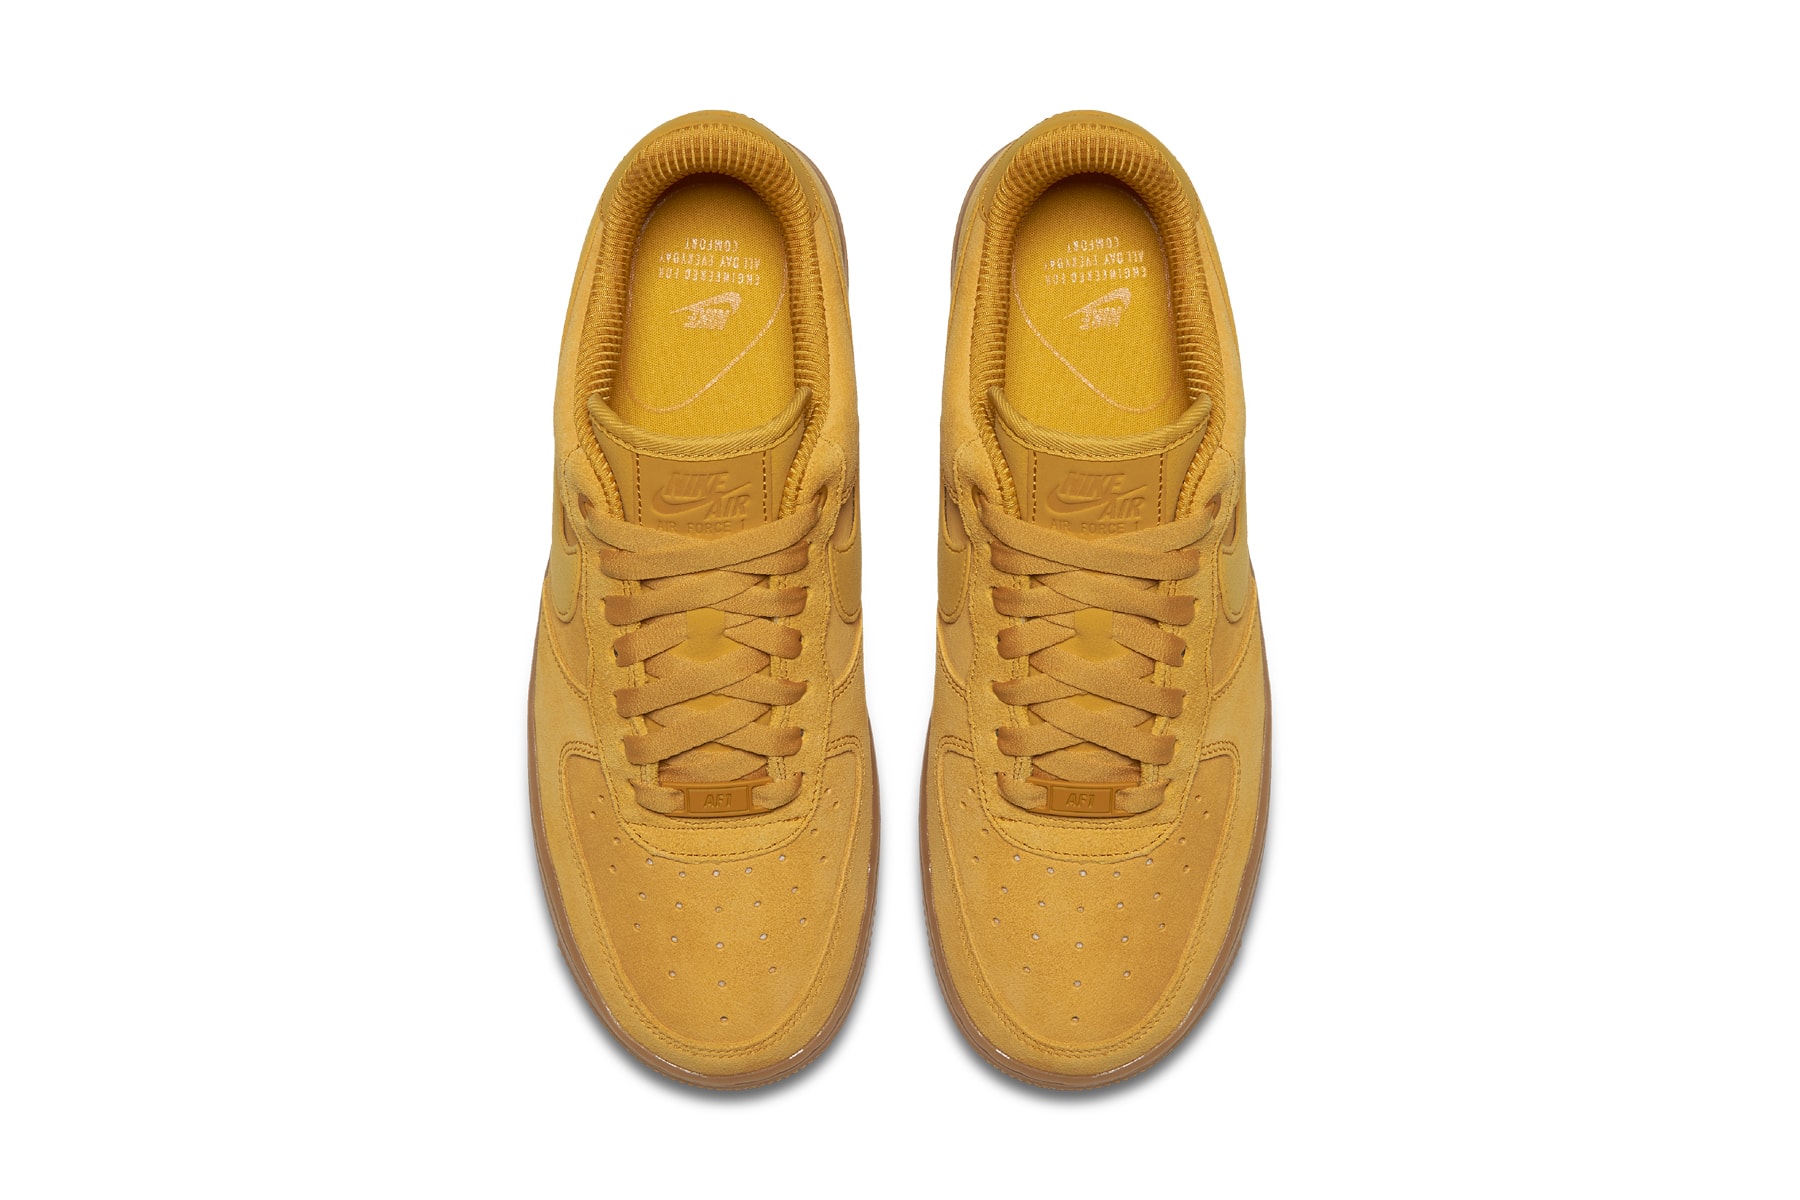 Nike Air Force 1 Sneaker Silhouette "Mineral Yellow" Colorway Color Bright Shoe Suede Gum Sole